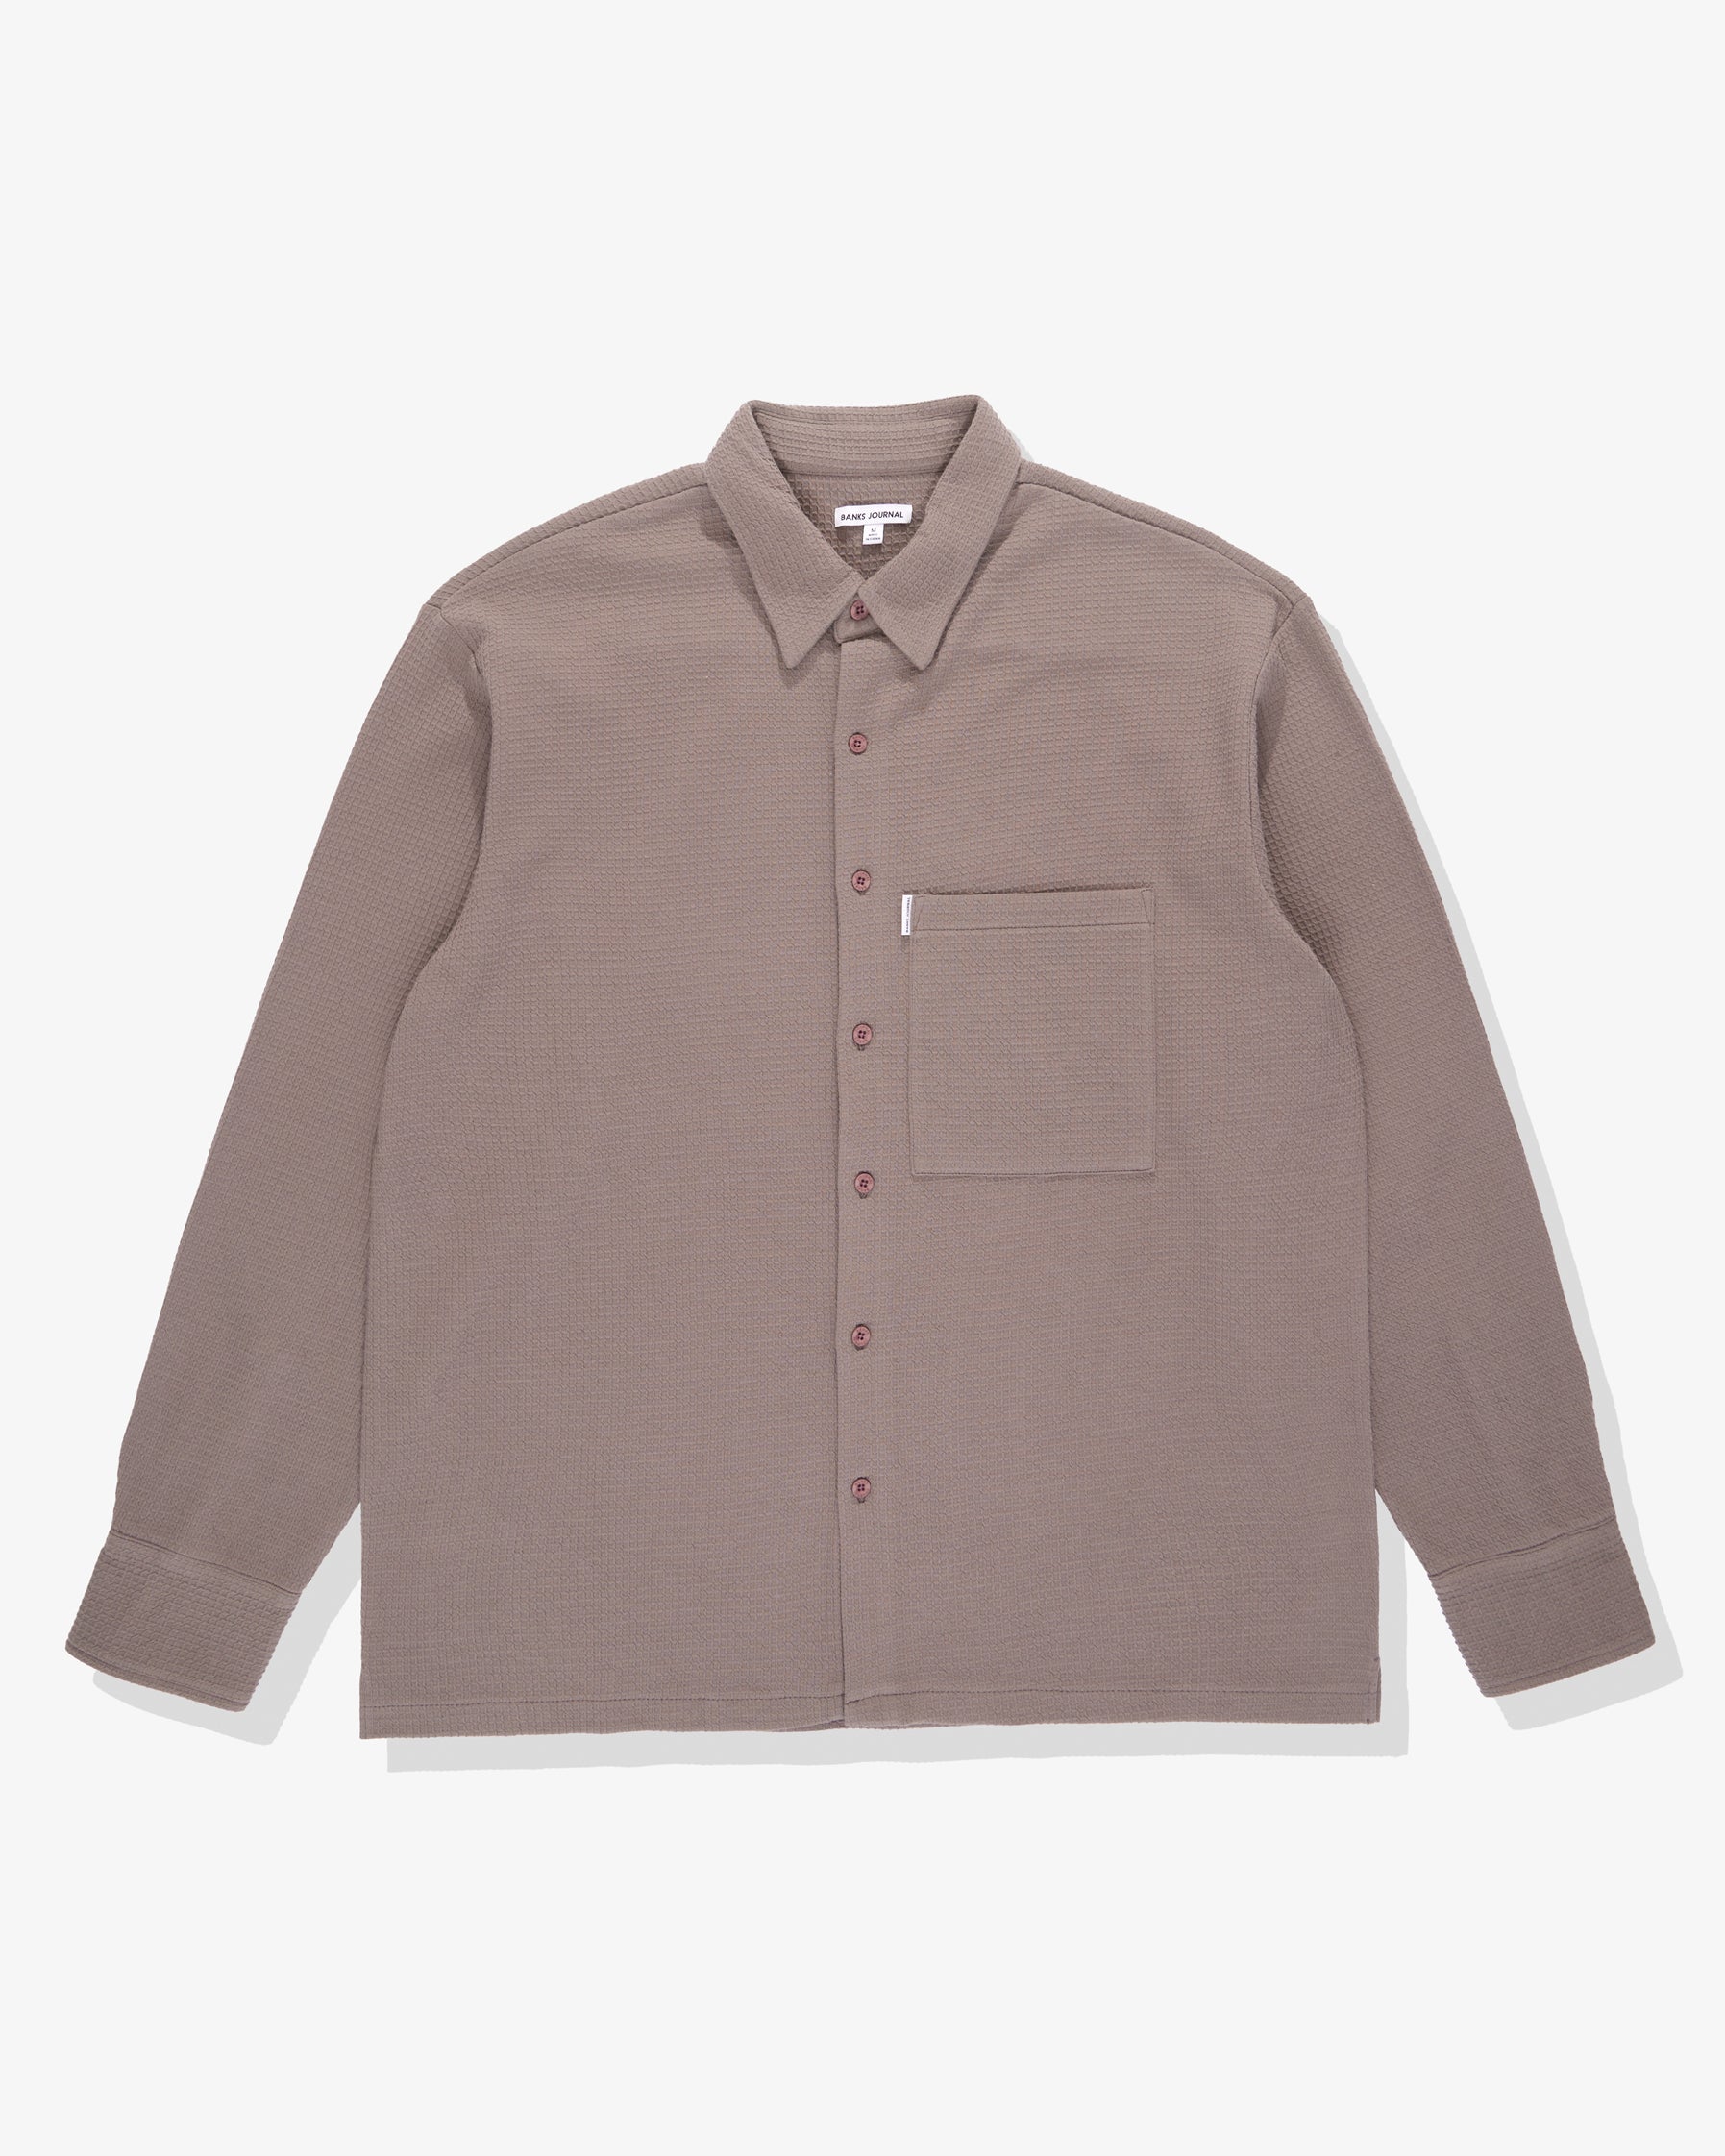 Thermal L/S Woven Shirt